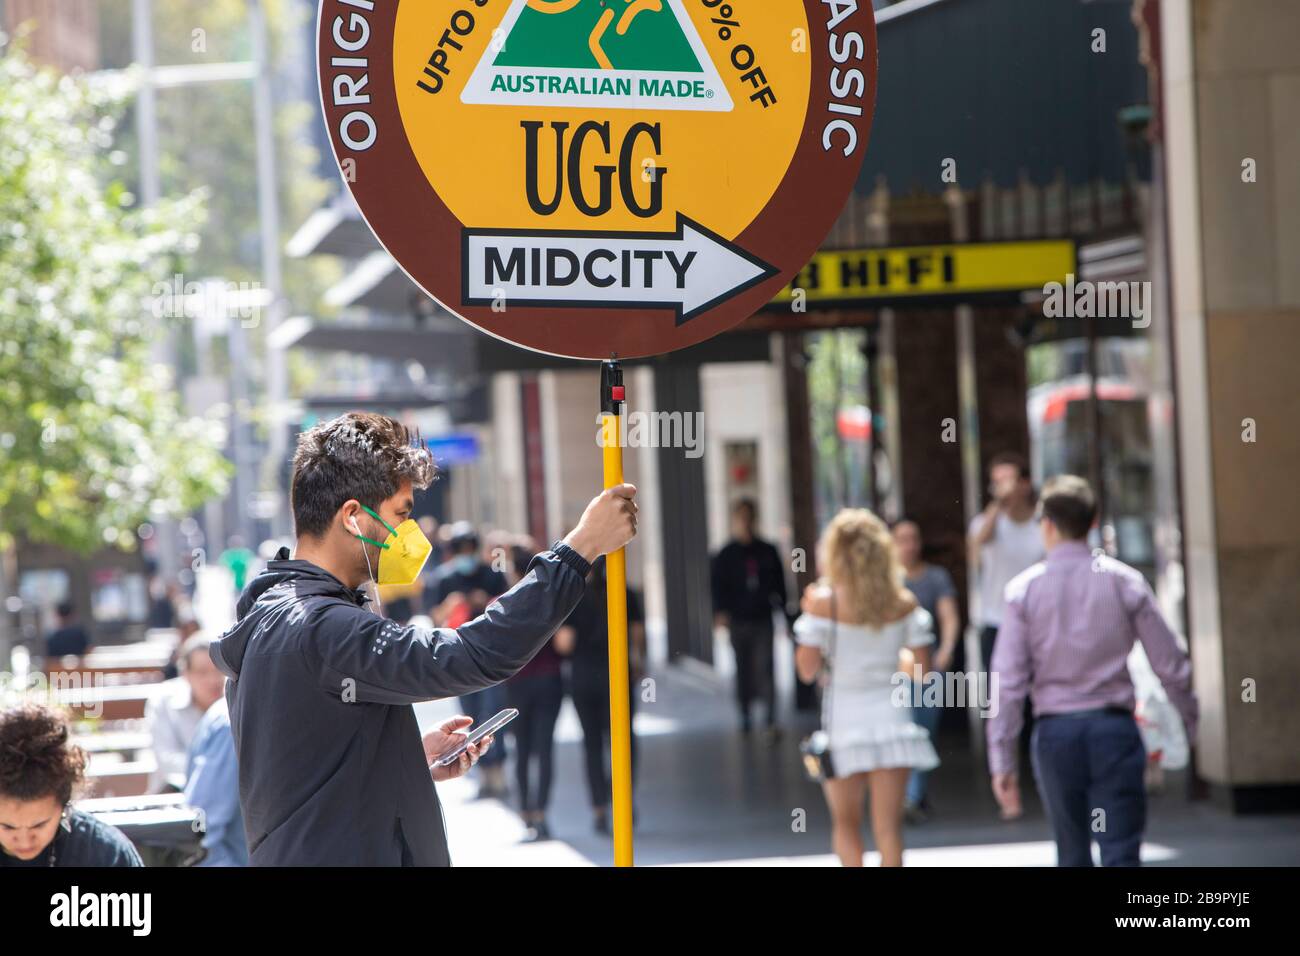 Sydney city centre, Australia. Wednesday 25th March 2020. Man with facemask  holding shop promotion sign for Ugg boots in Sydney city centre. Credit  Martin Berry/Alamy Live News Stock Photo - Alamy